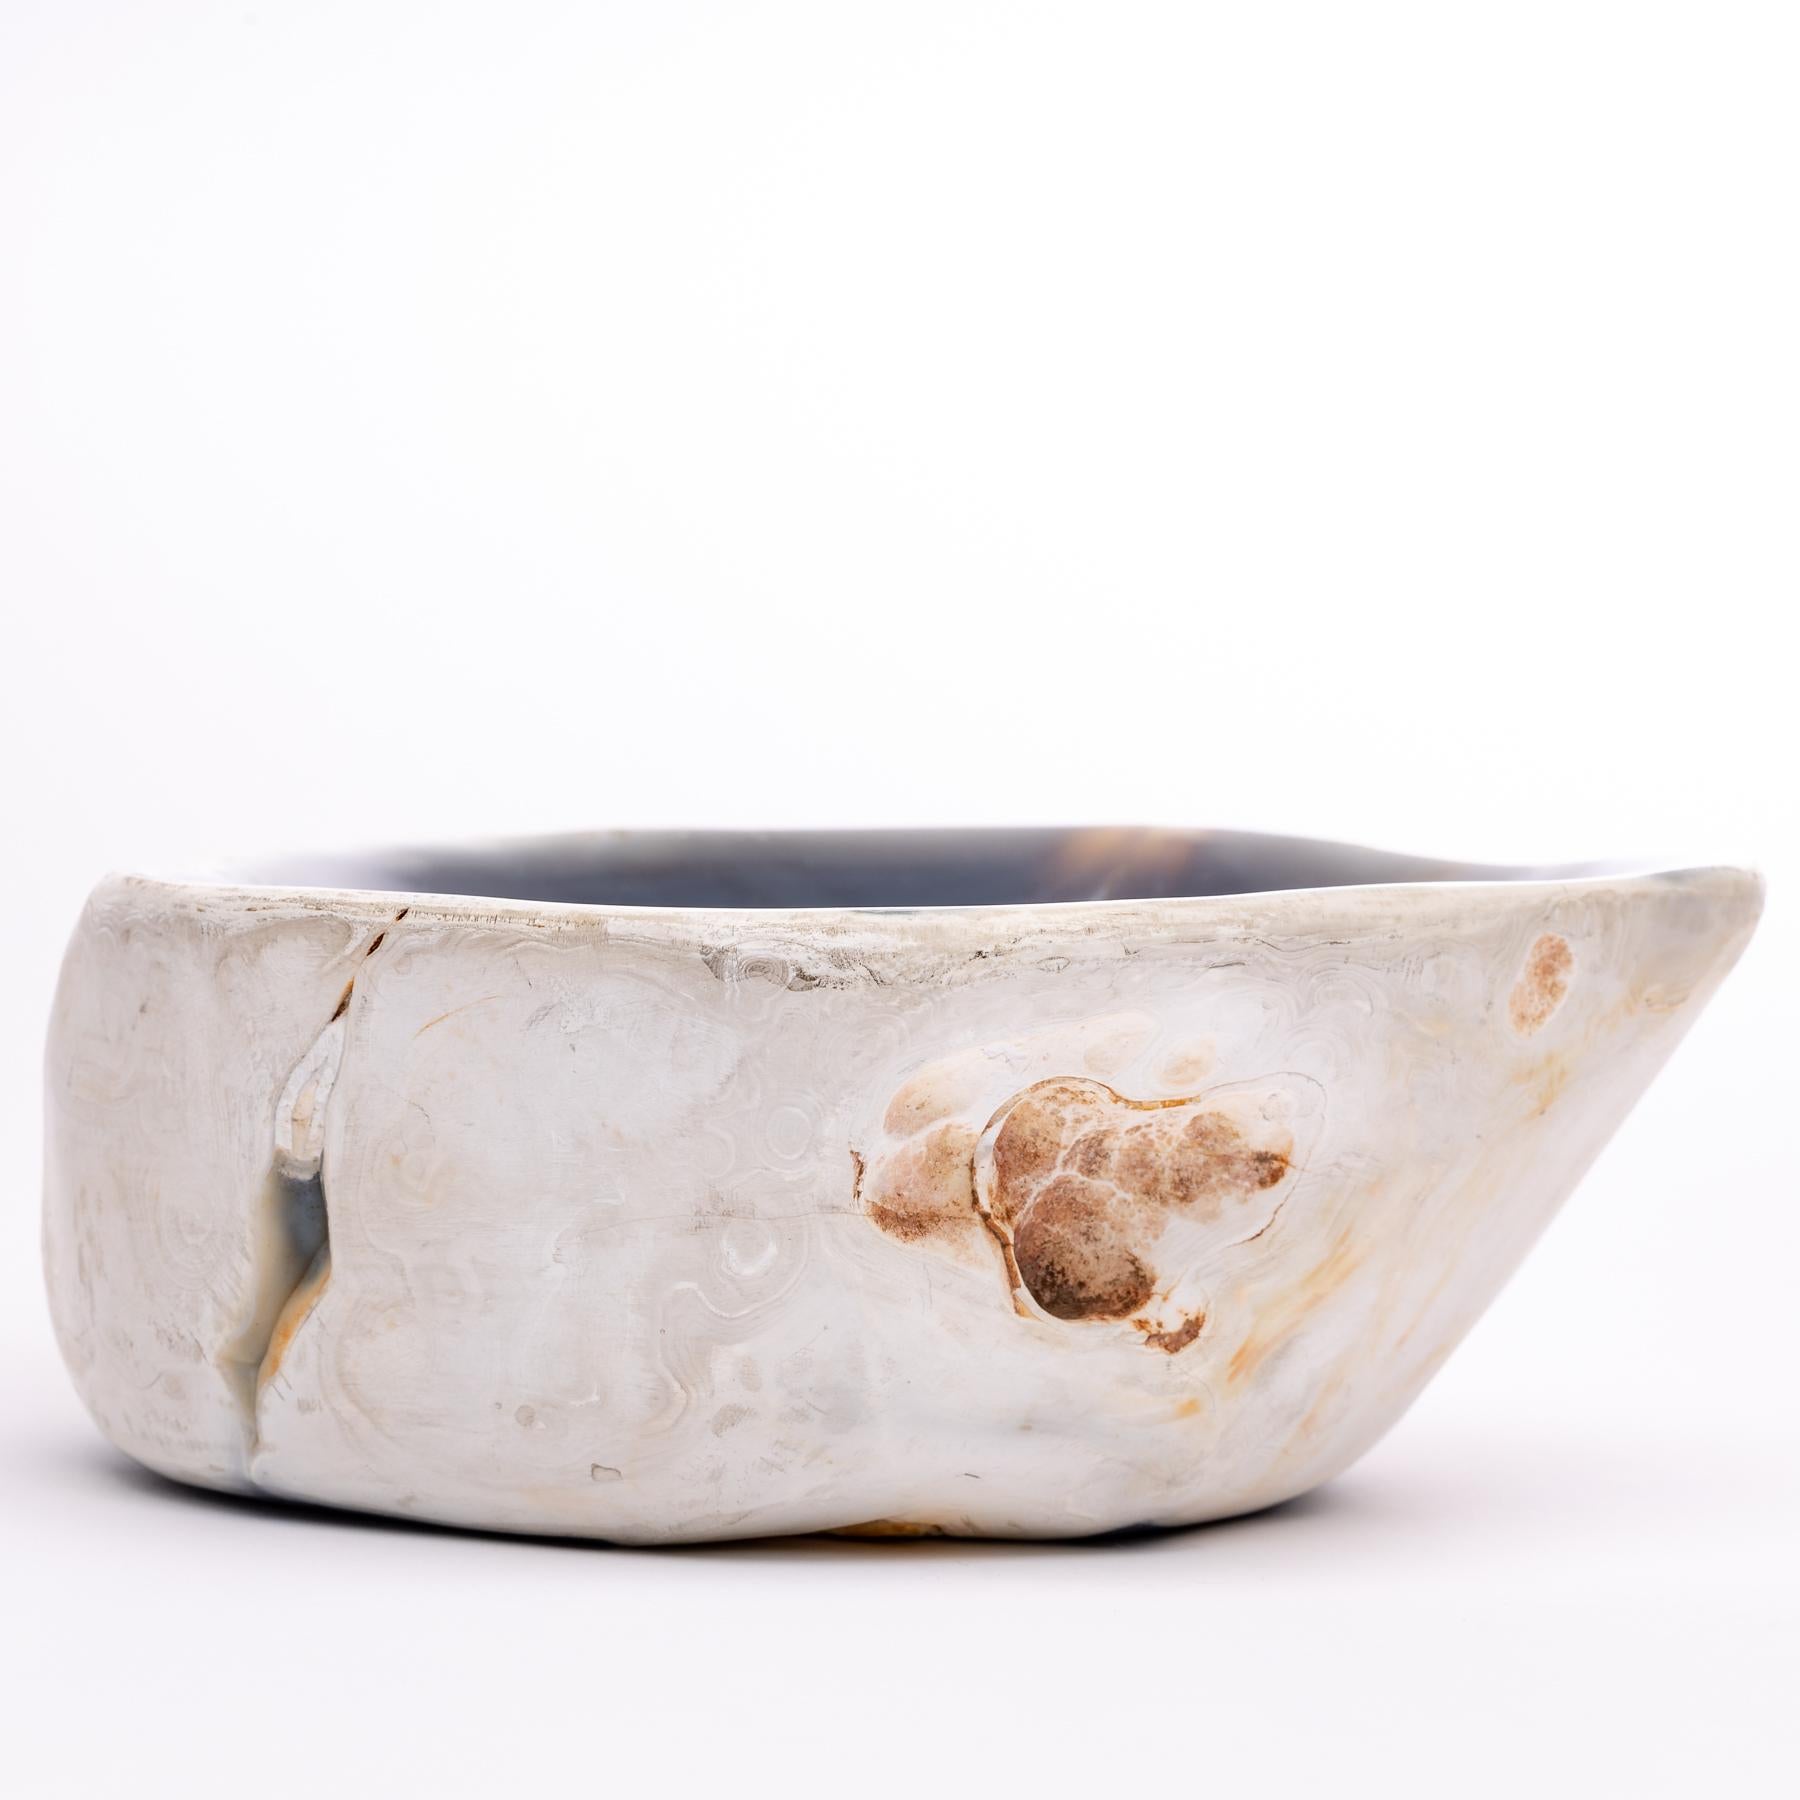 Polished White and Blue Agate Geode Bowl from Madagascar